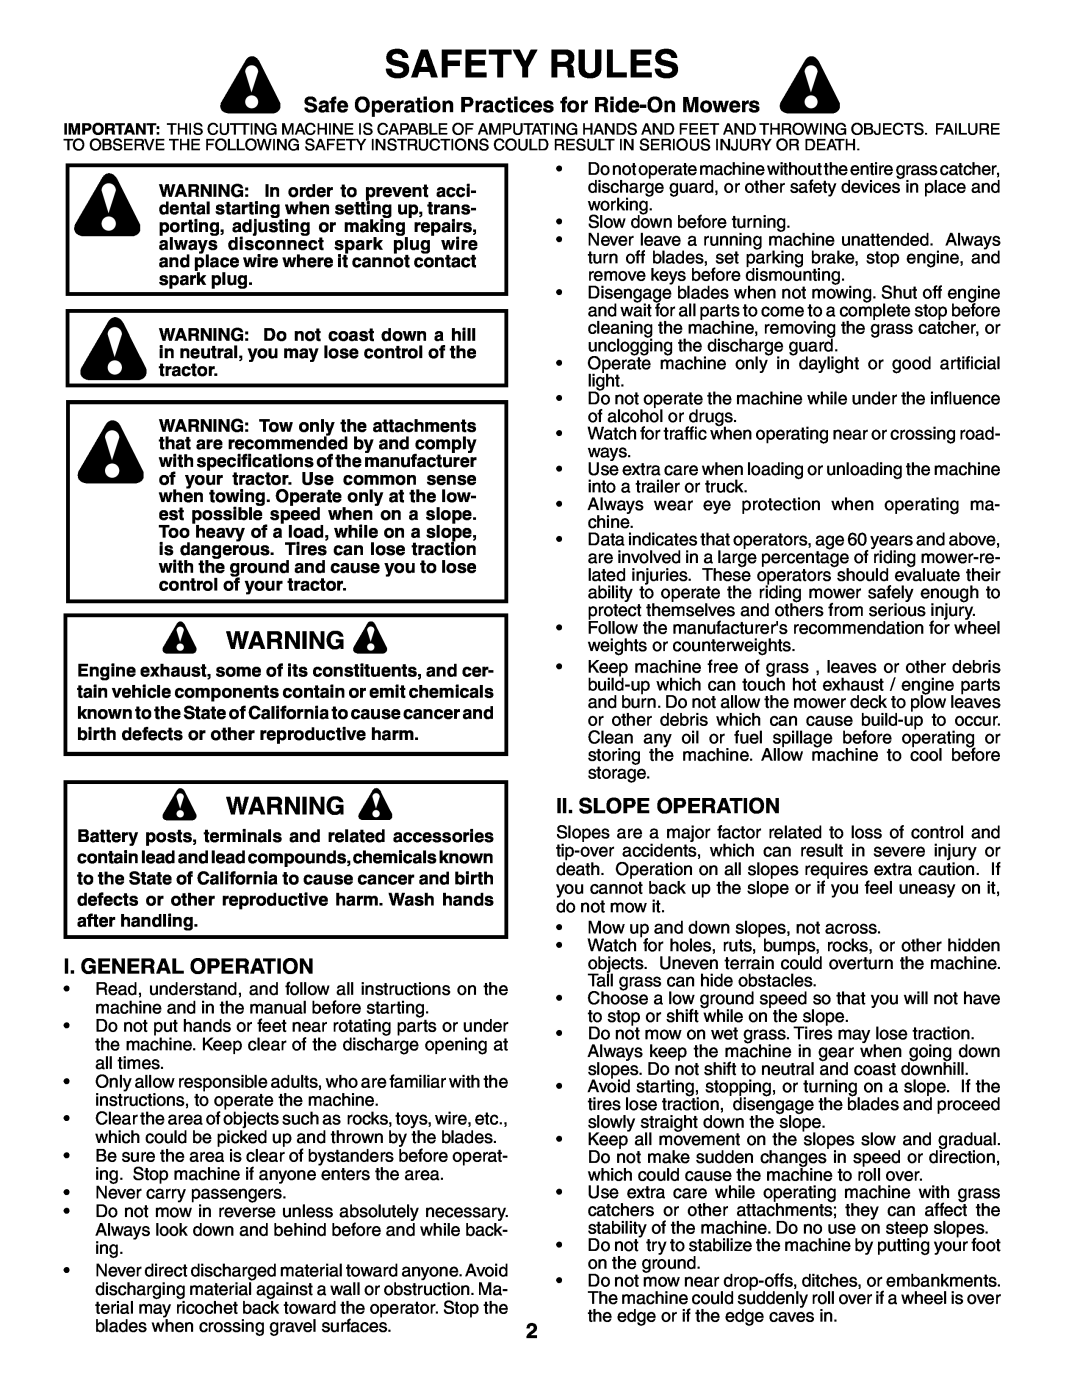 Poulan HD13538 manual Safety Rules, Safe Operation Practices for Ride-OnMowers, I. General Operation, Ii. Slope Operation 